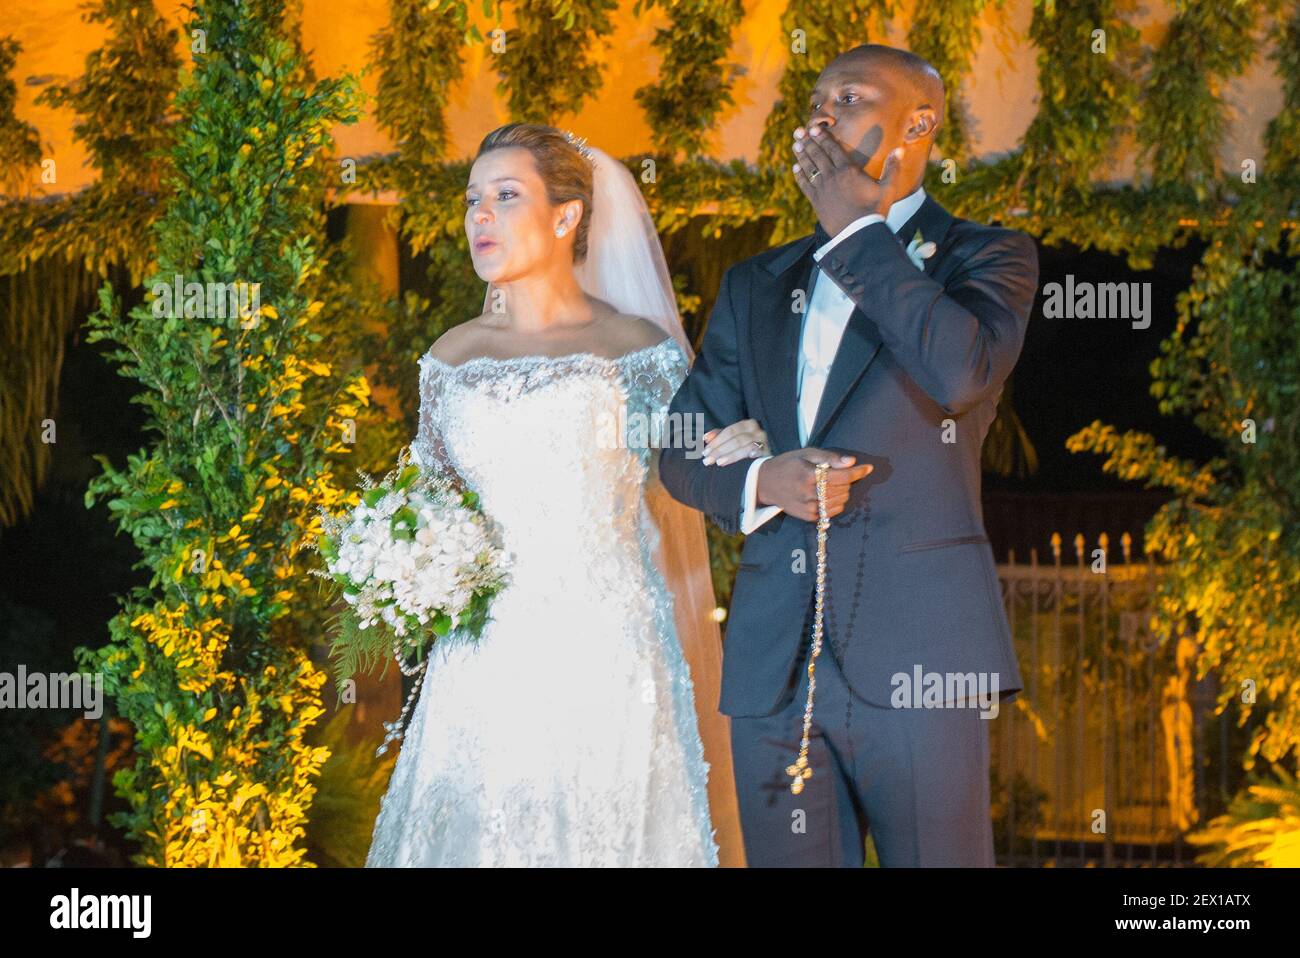 Wedding of singer Thiaguinho and actress Fernanda Souza in the church Our  Lady of Brazil in the Jardins neighborhood. Sao Paulo, Brazil - 2/24/2015.  (Photo by Bruno Fernandes/Fotoarena) *** Please Use Credit